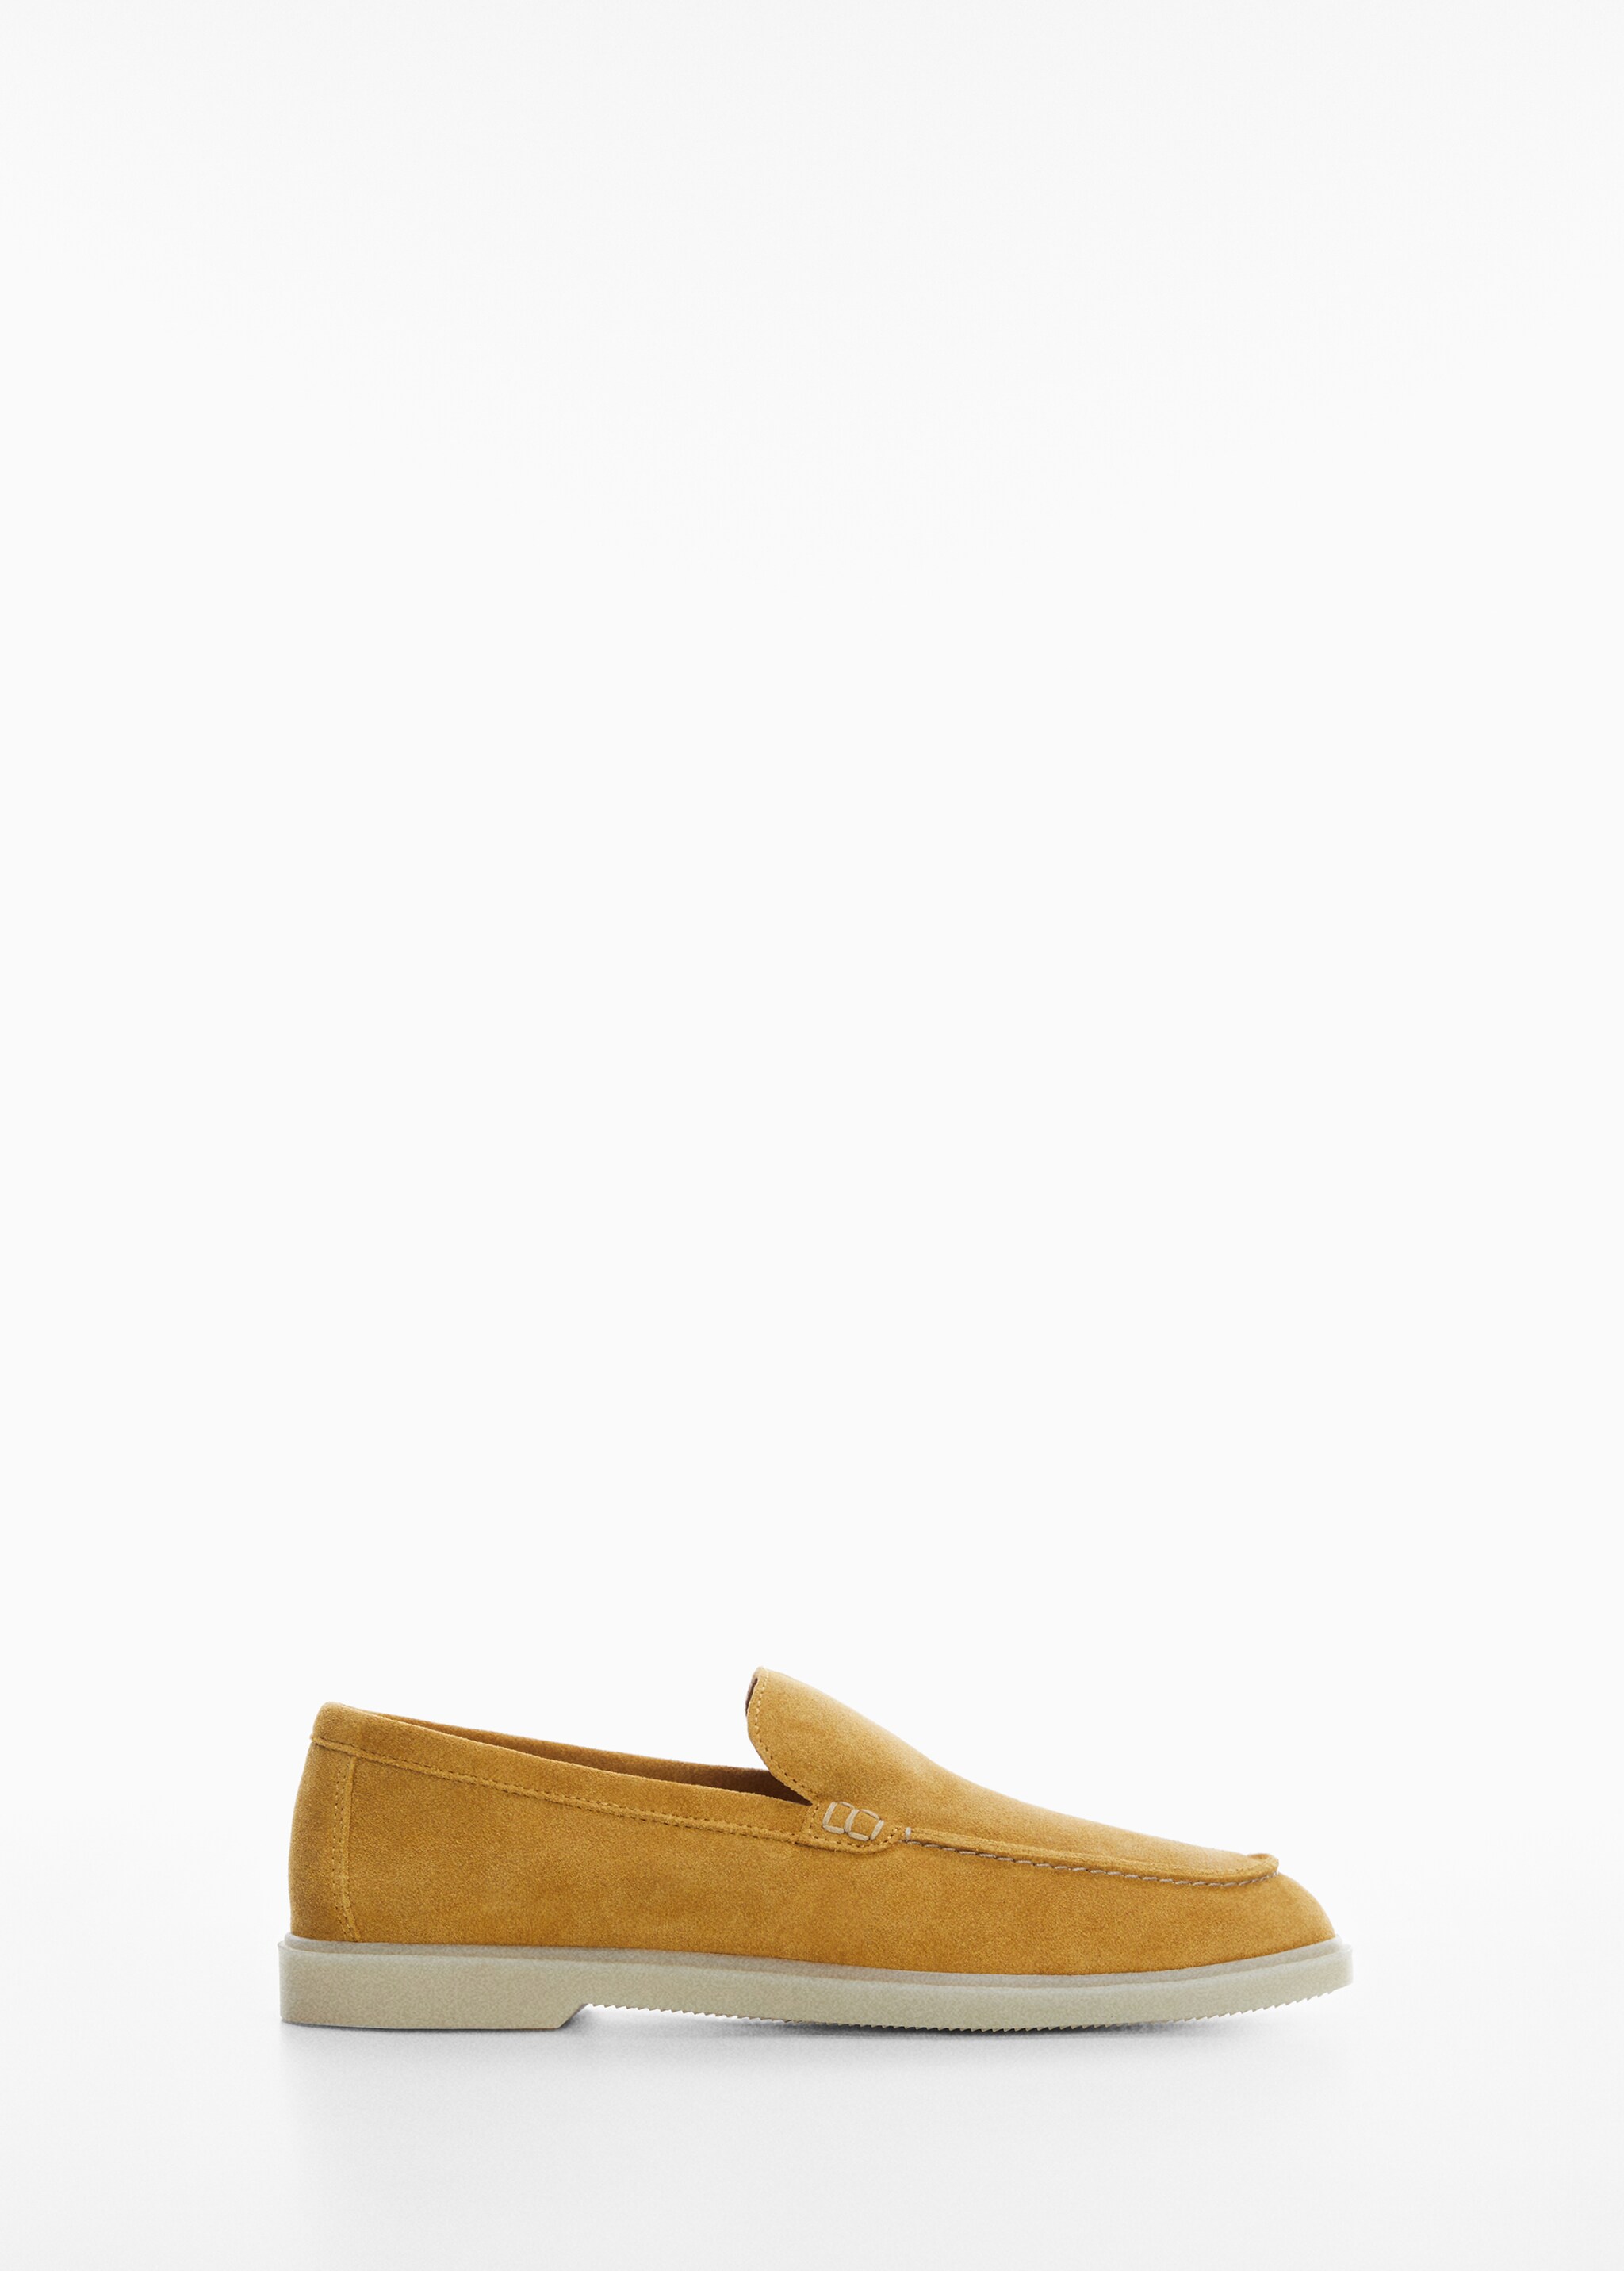 Suede leather moccasin - Article without model